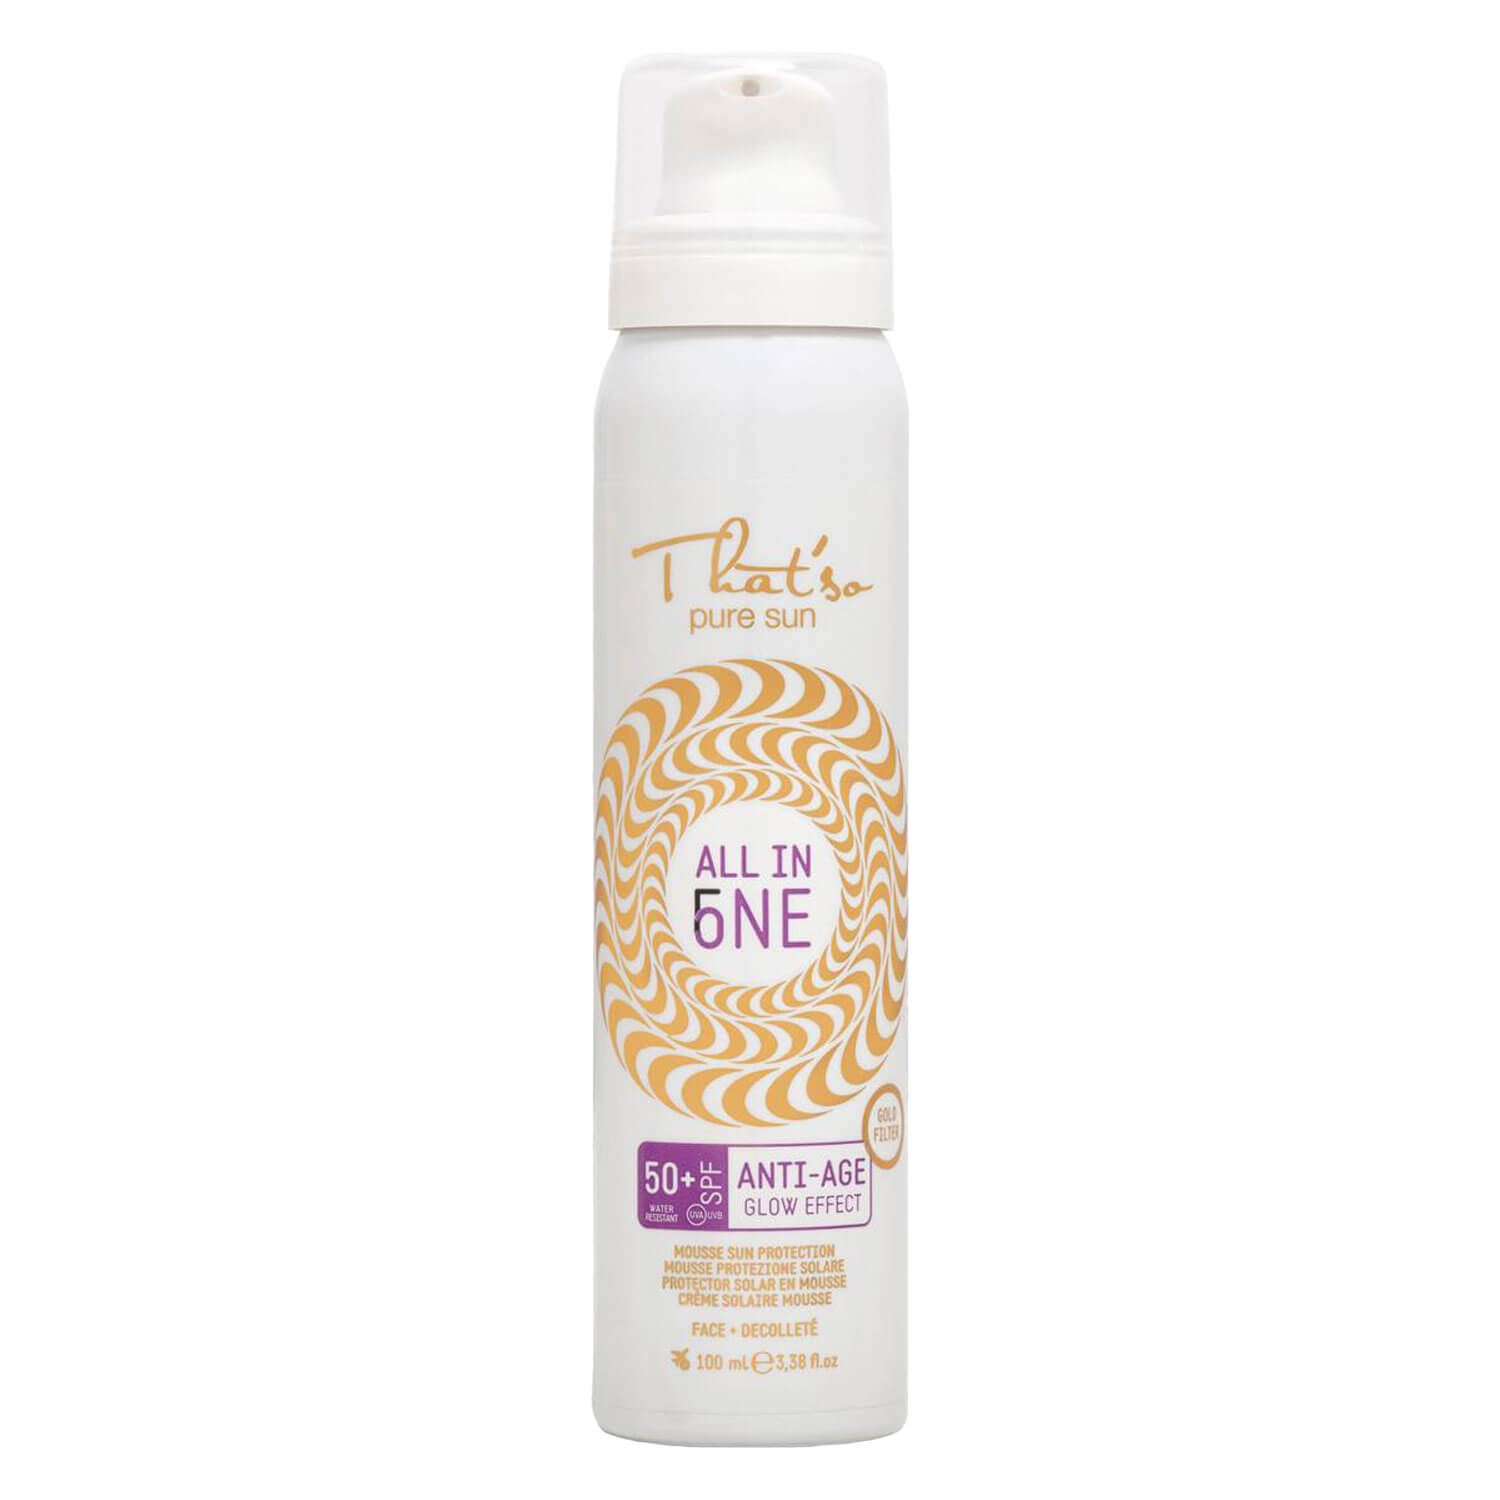 Produktbild von That'so - ALL IN ONE ANTI-AGE MOUSSE SUN PROTECTION SPF 50+